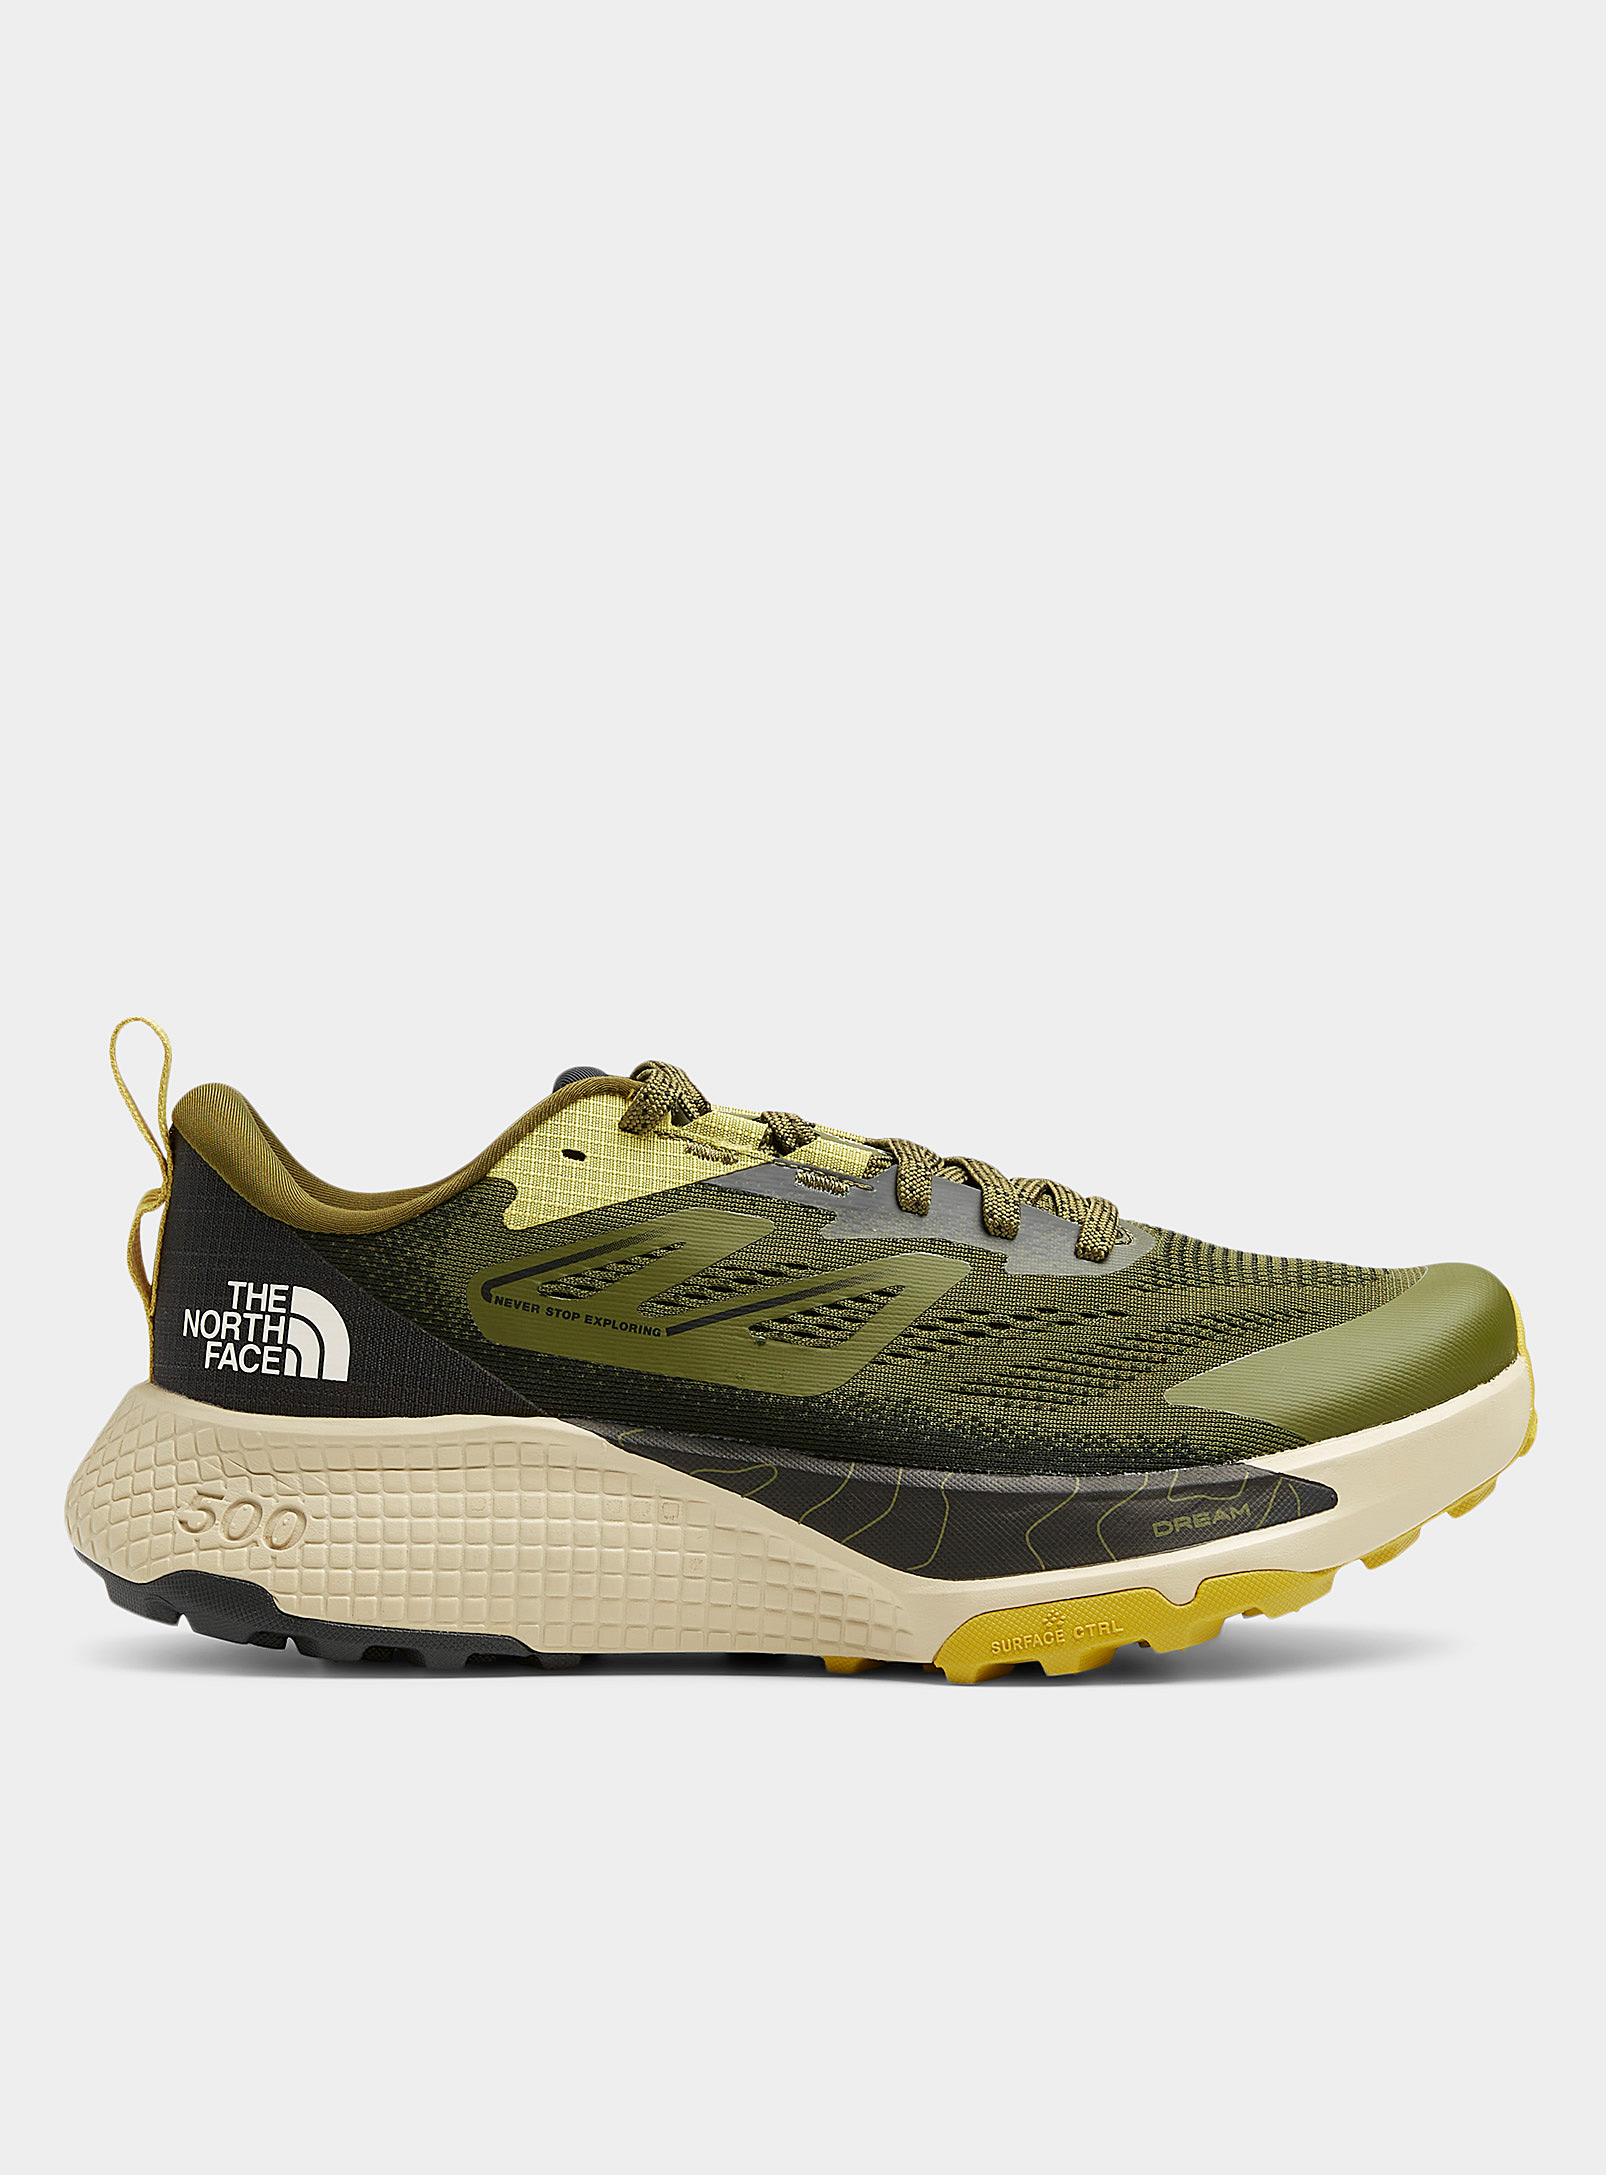 The North Face Altamesa 500 Sneakers Men In Mossy Green